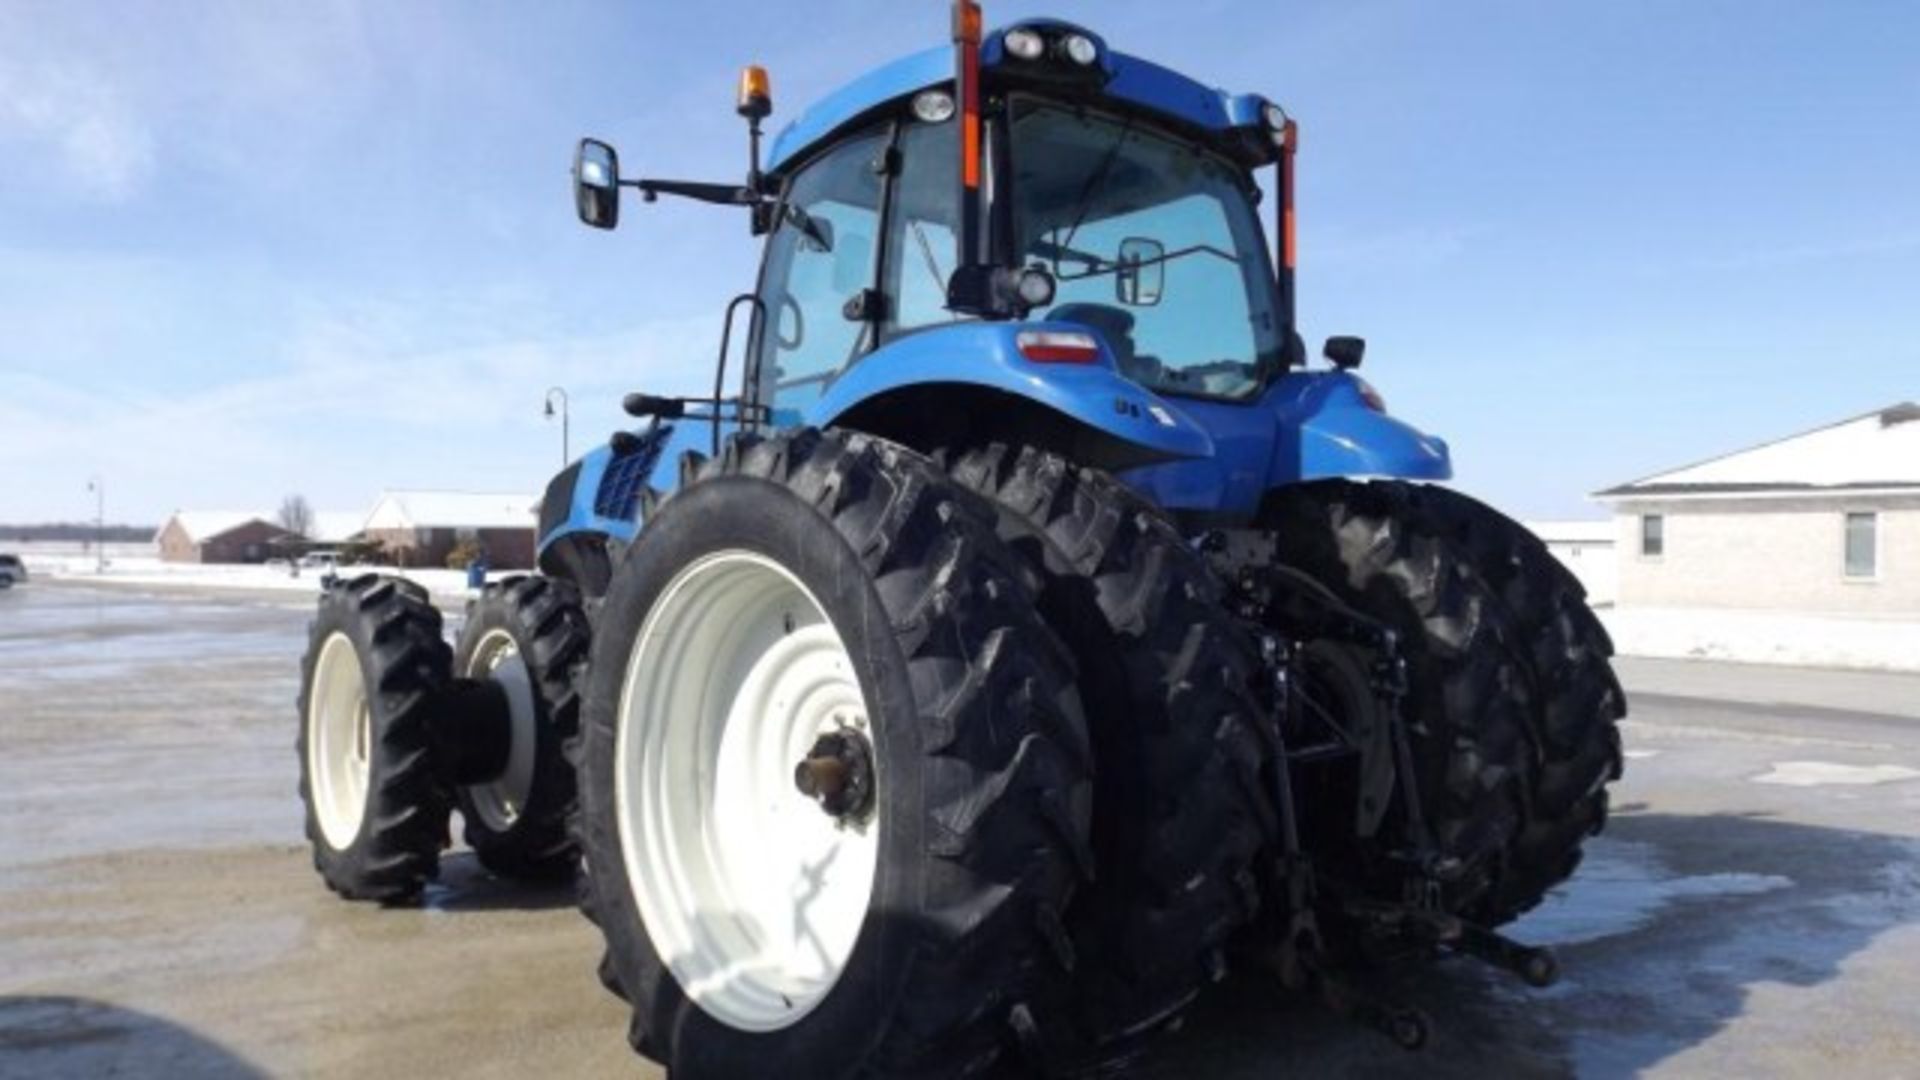 New Holland T8.330 Tractor '12, sn#ZBRC08592 1192 Hrs, MFWD, Deluxe Cab, Buddy Seat, 280 HP, 18/4 - Image 4 of 19